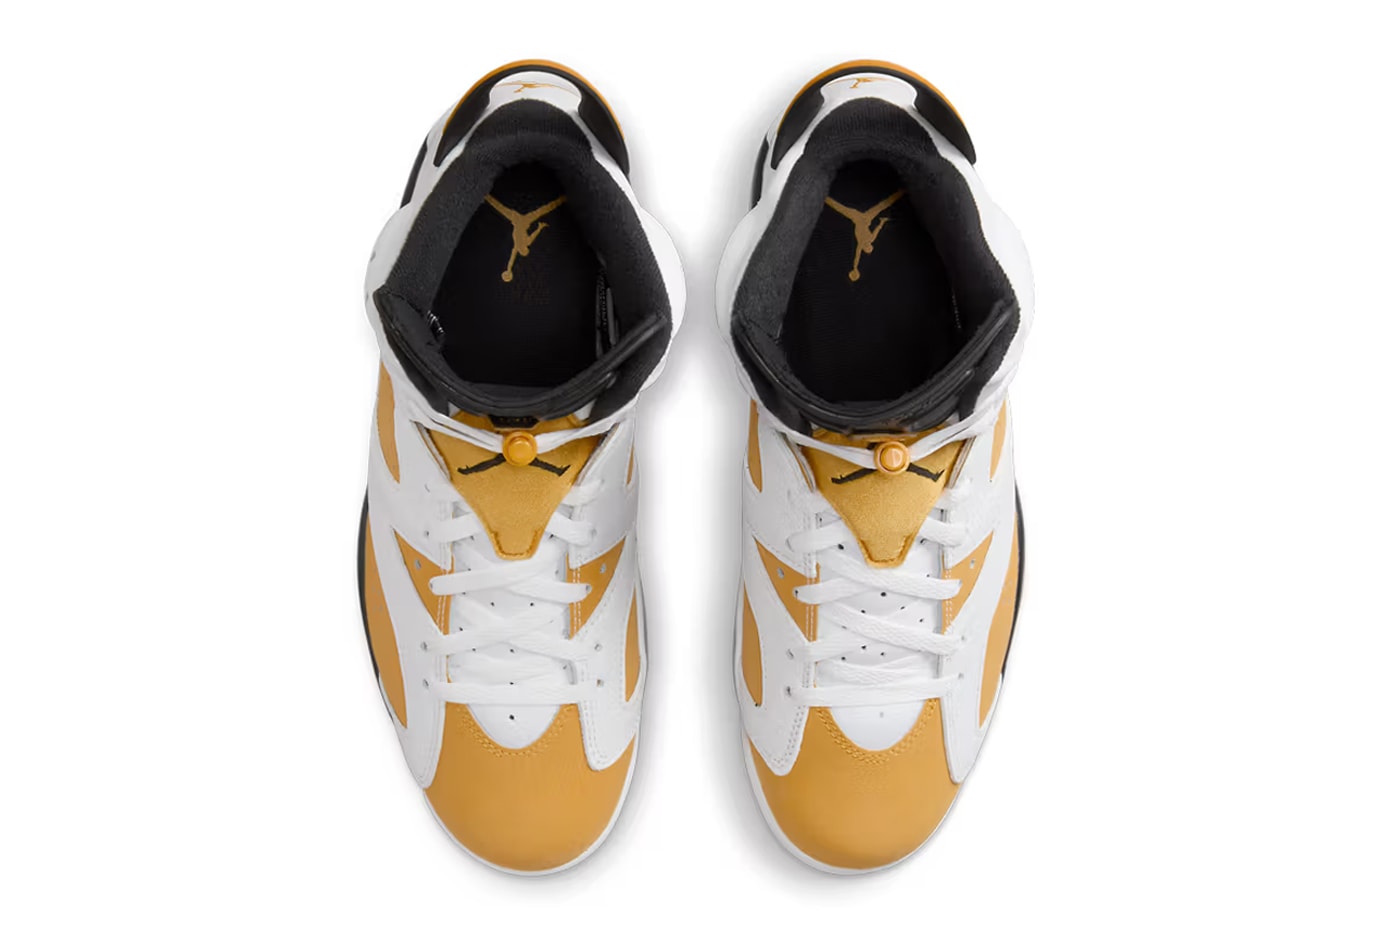 air jordan 6 yellow ochre CT8529 170 release date info store list buying guide photos price 